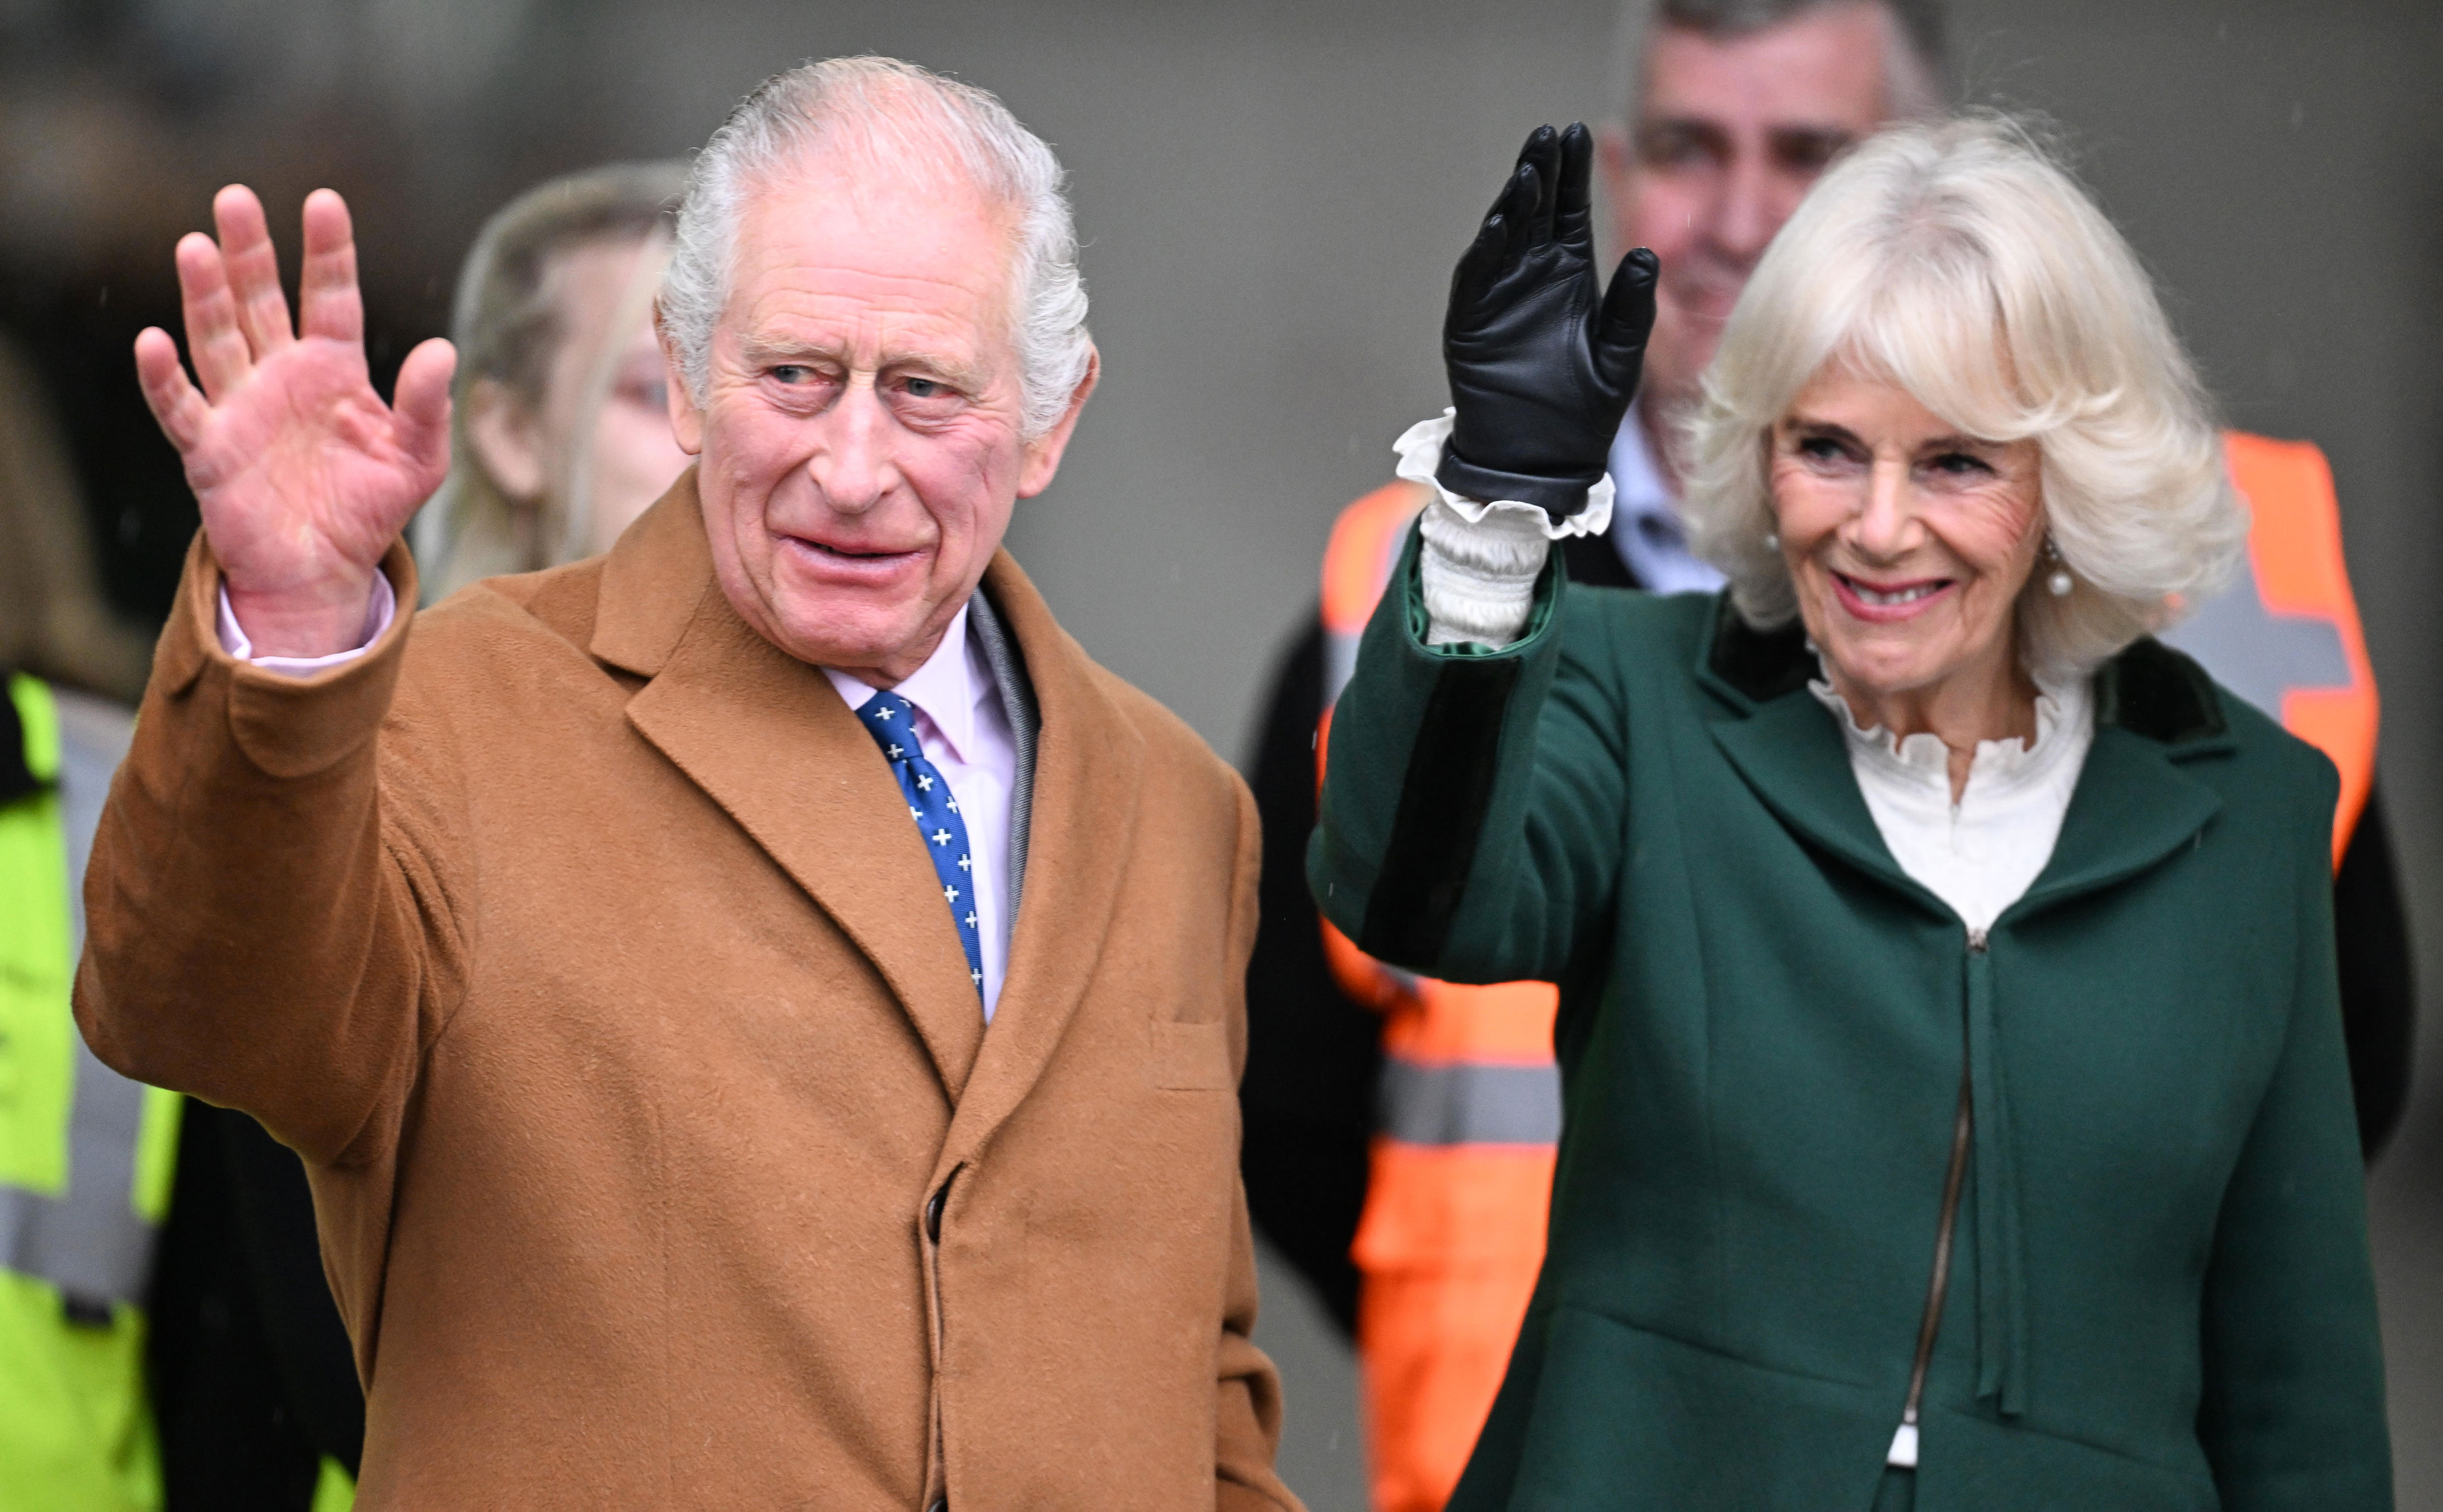 <p><span>King Charles III and Queen Camilla waved to the crowds on His Majesty's 75th birthday as they launched the Coronation Food Project in Didcot, Oxfordshire, England, at a surplus food distribution center on Nov. 14, 2023. </span></p><p>The project seeks to bridge the gap between food waste and food need across all four nations of the United Kingdom, helping people and helping the planet.</p><p>MORE: <a href="https://www.wonderwall.com/celebrity/royals/duchess-camilla-parker-bowles-prince-charles-queen-consort-wife-best-photos-622676.gallery">See the best photos of Queen Camilla since her marriage to King Charles III</a></p>